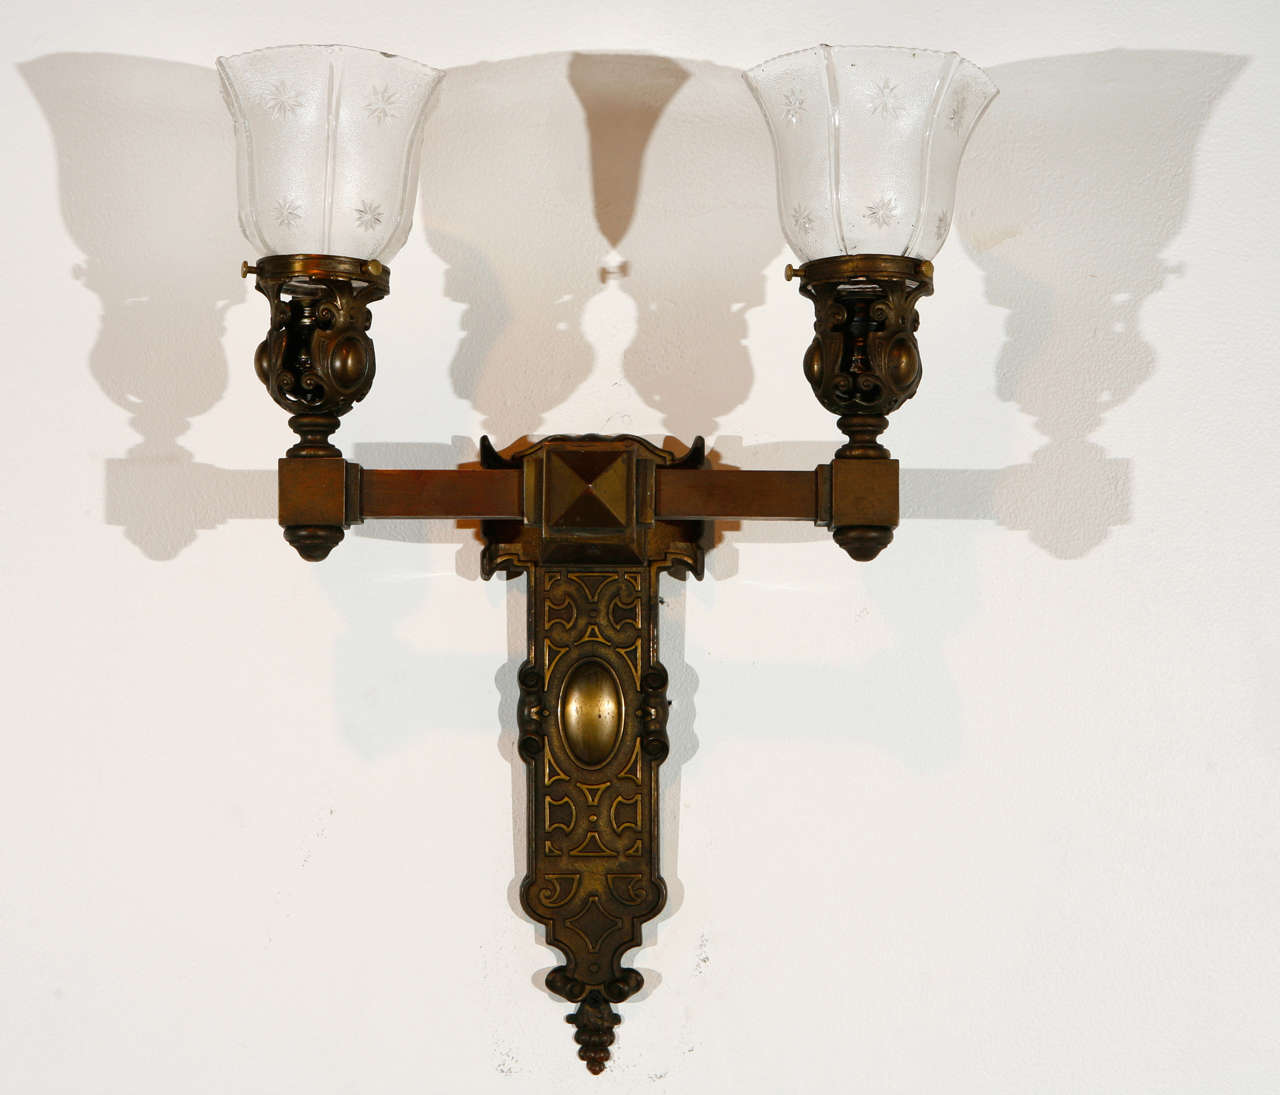 Pair of American double arm sconces; shades are not original to the fixture, but are of the period.